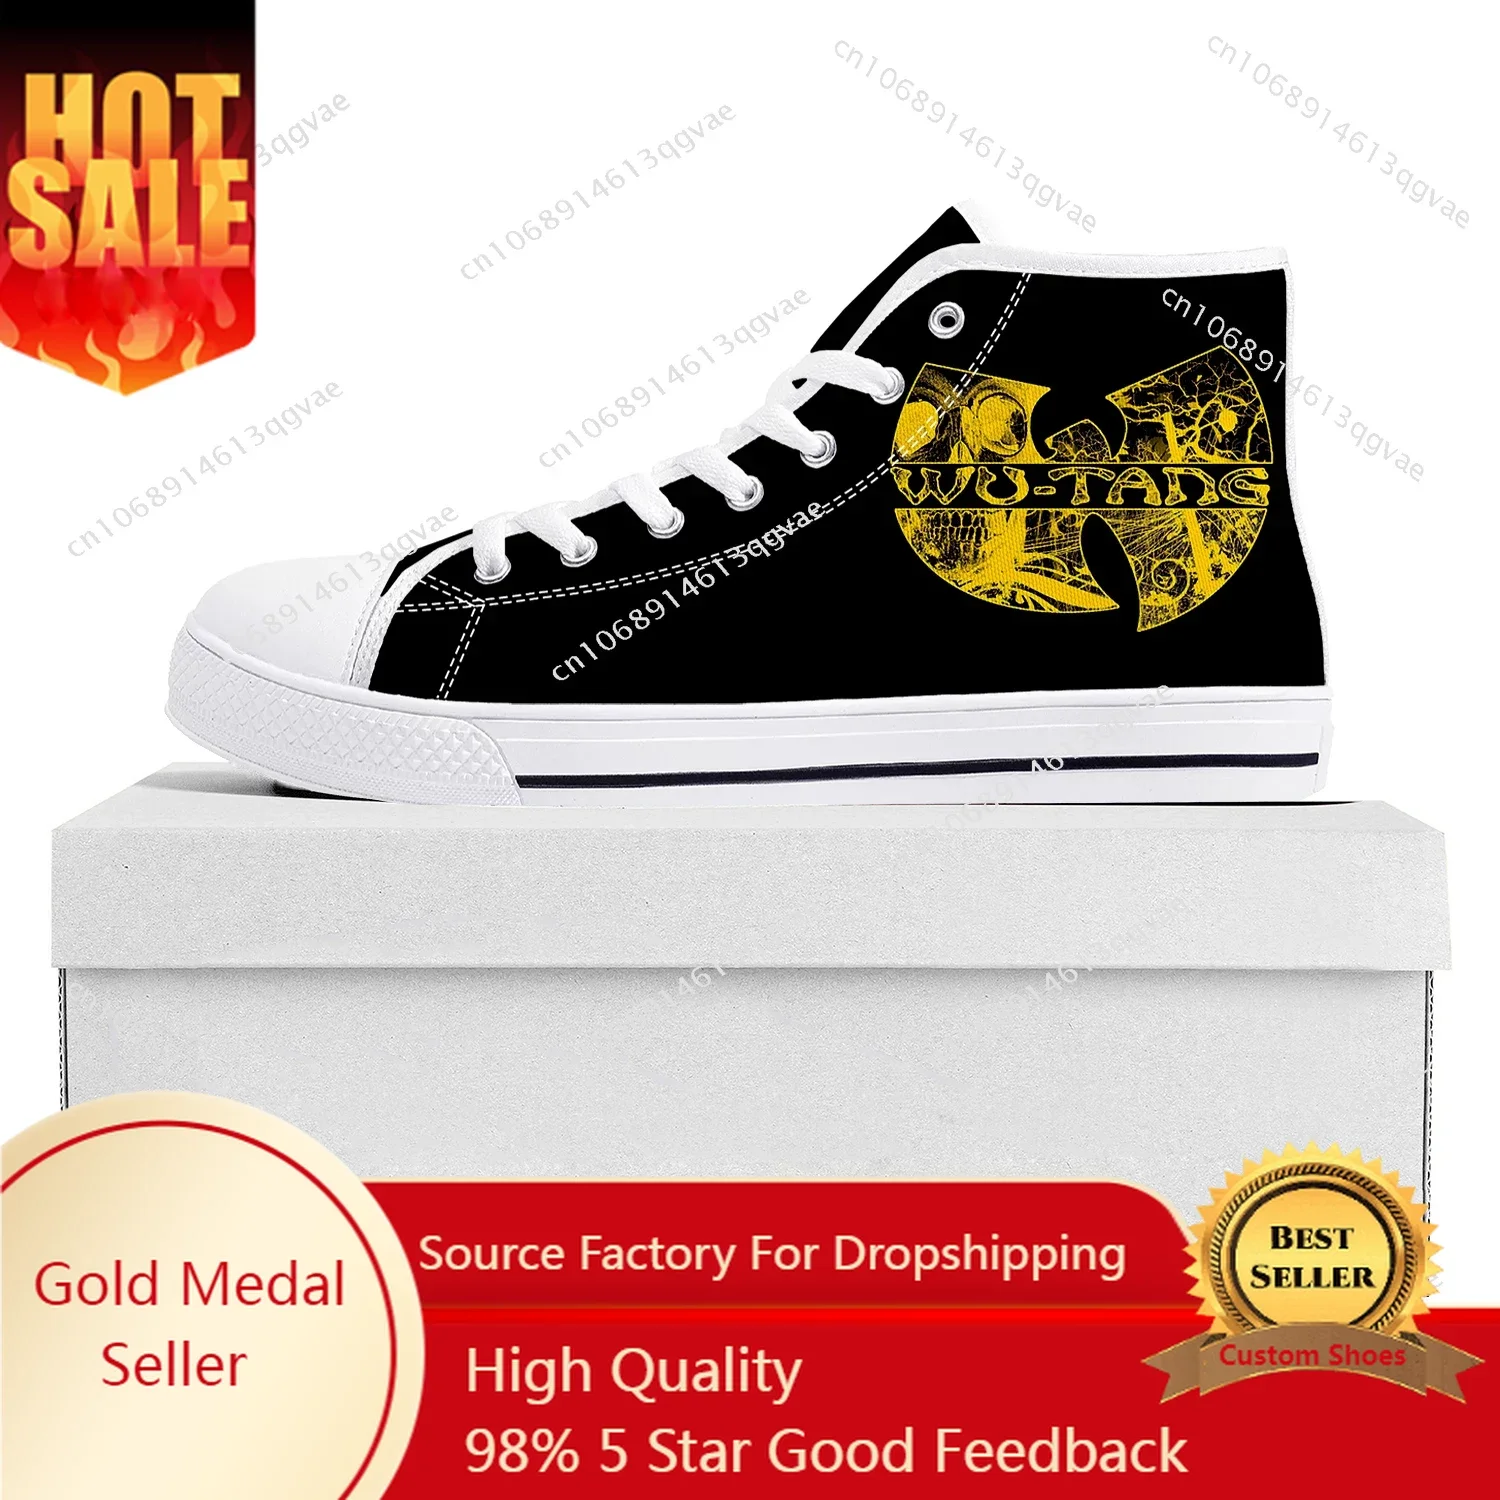 

W-Wu-T Clan High Top High Quality Sneakers Mens Womens Teenager Tang Canvas Sneaker Casual Couple Shoes Custom Made Shoe White